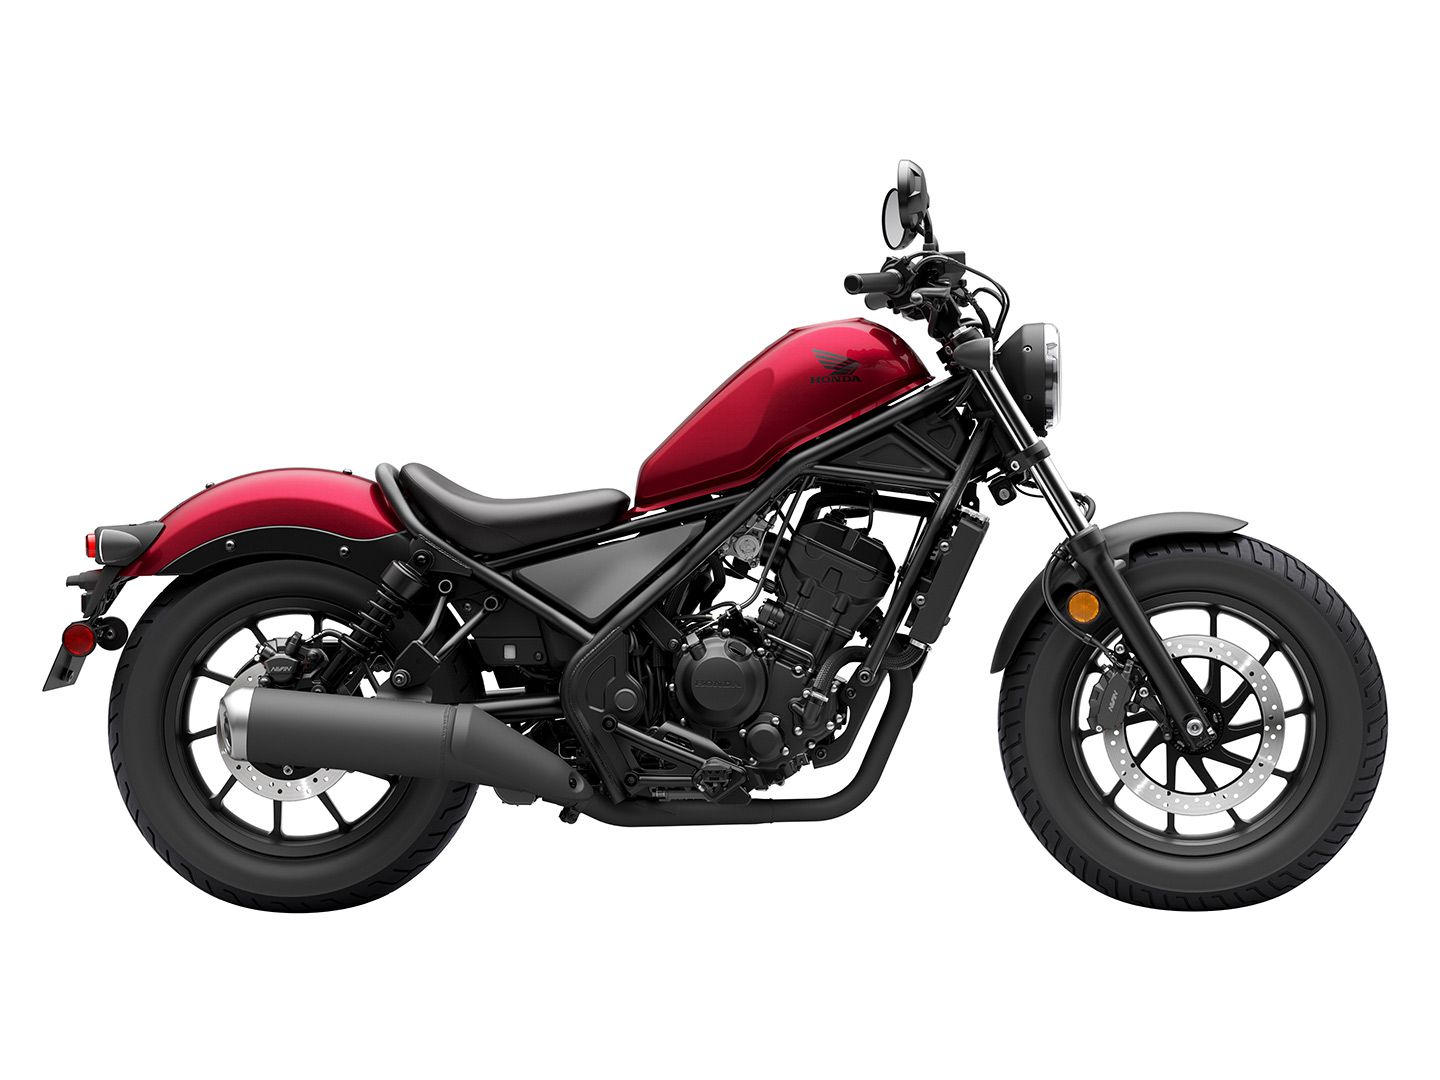 The Honda Rebel 300 is smooth, easy to handle, and a great value for the price.